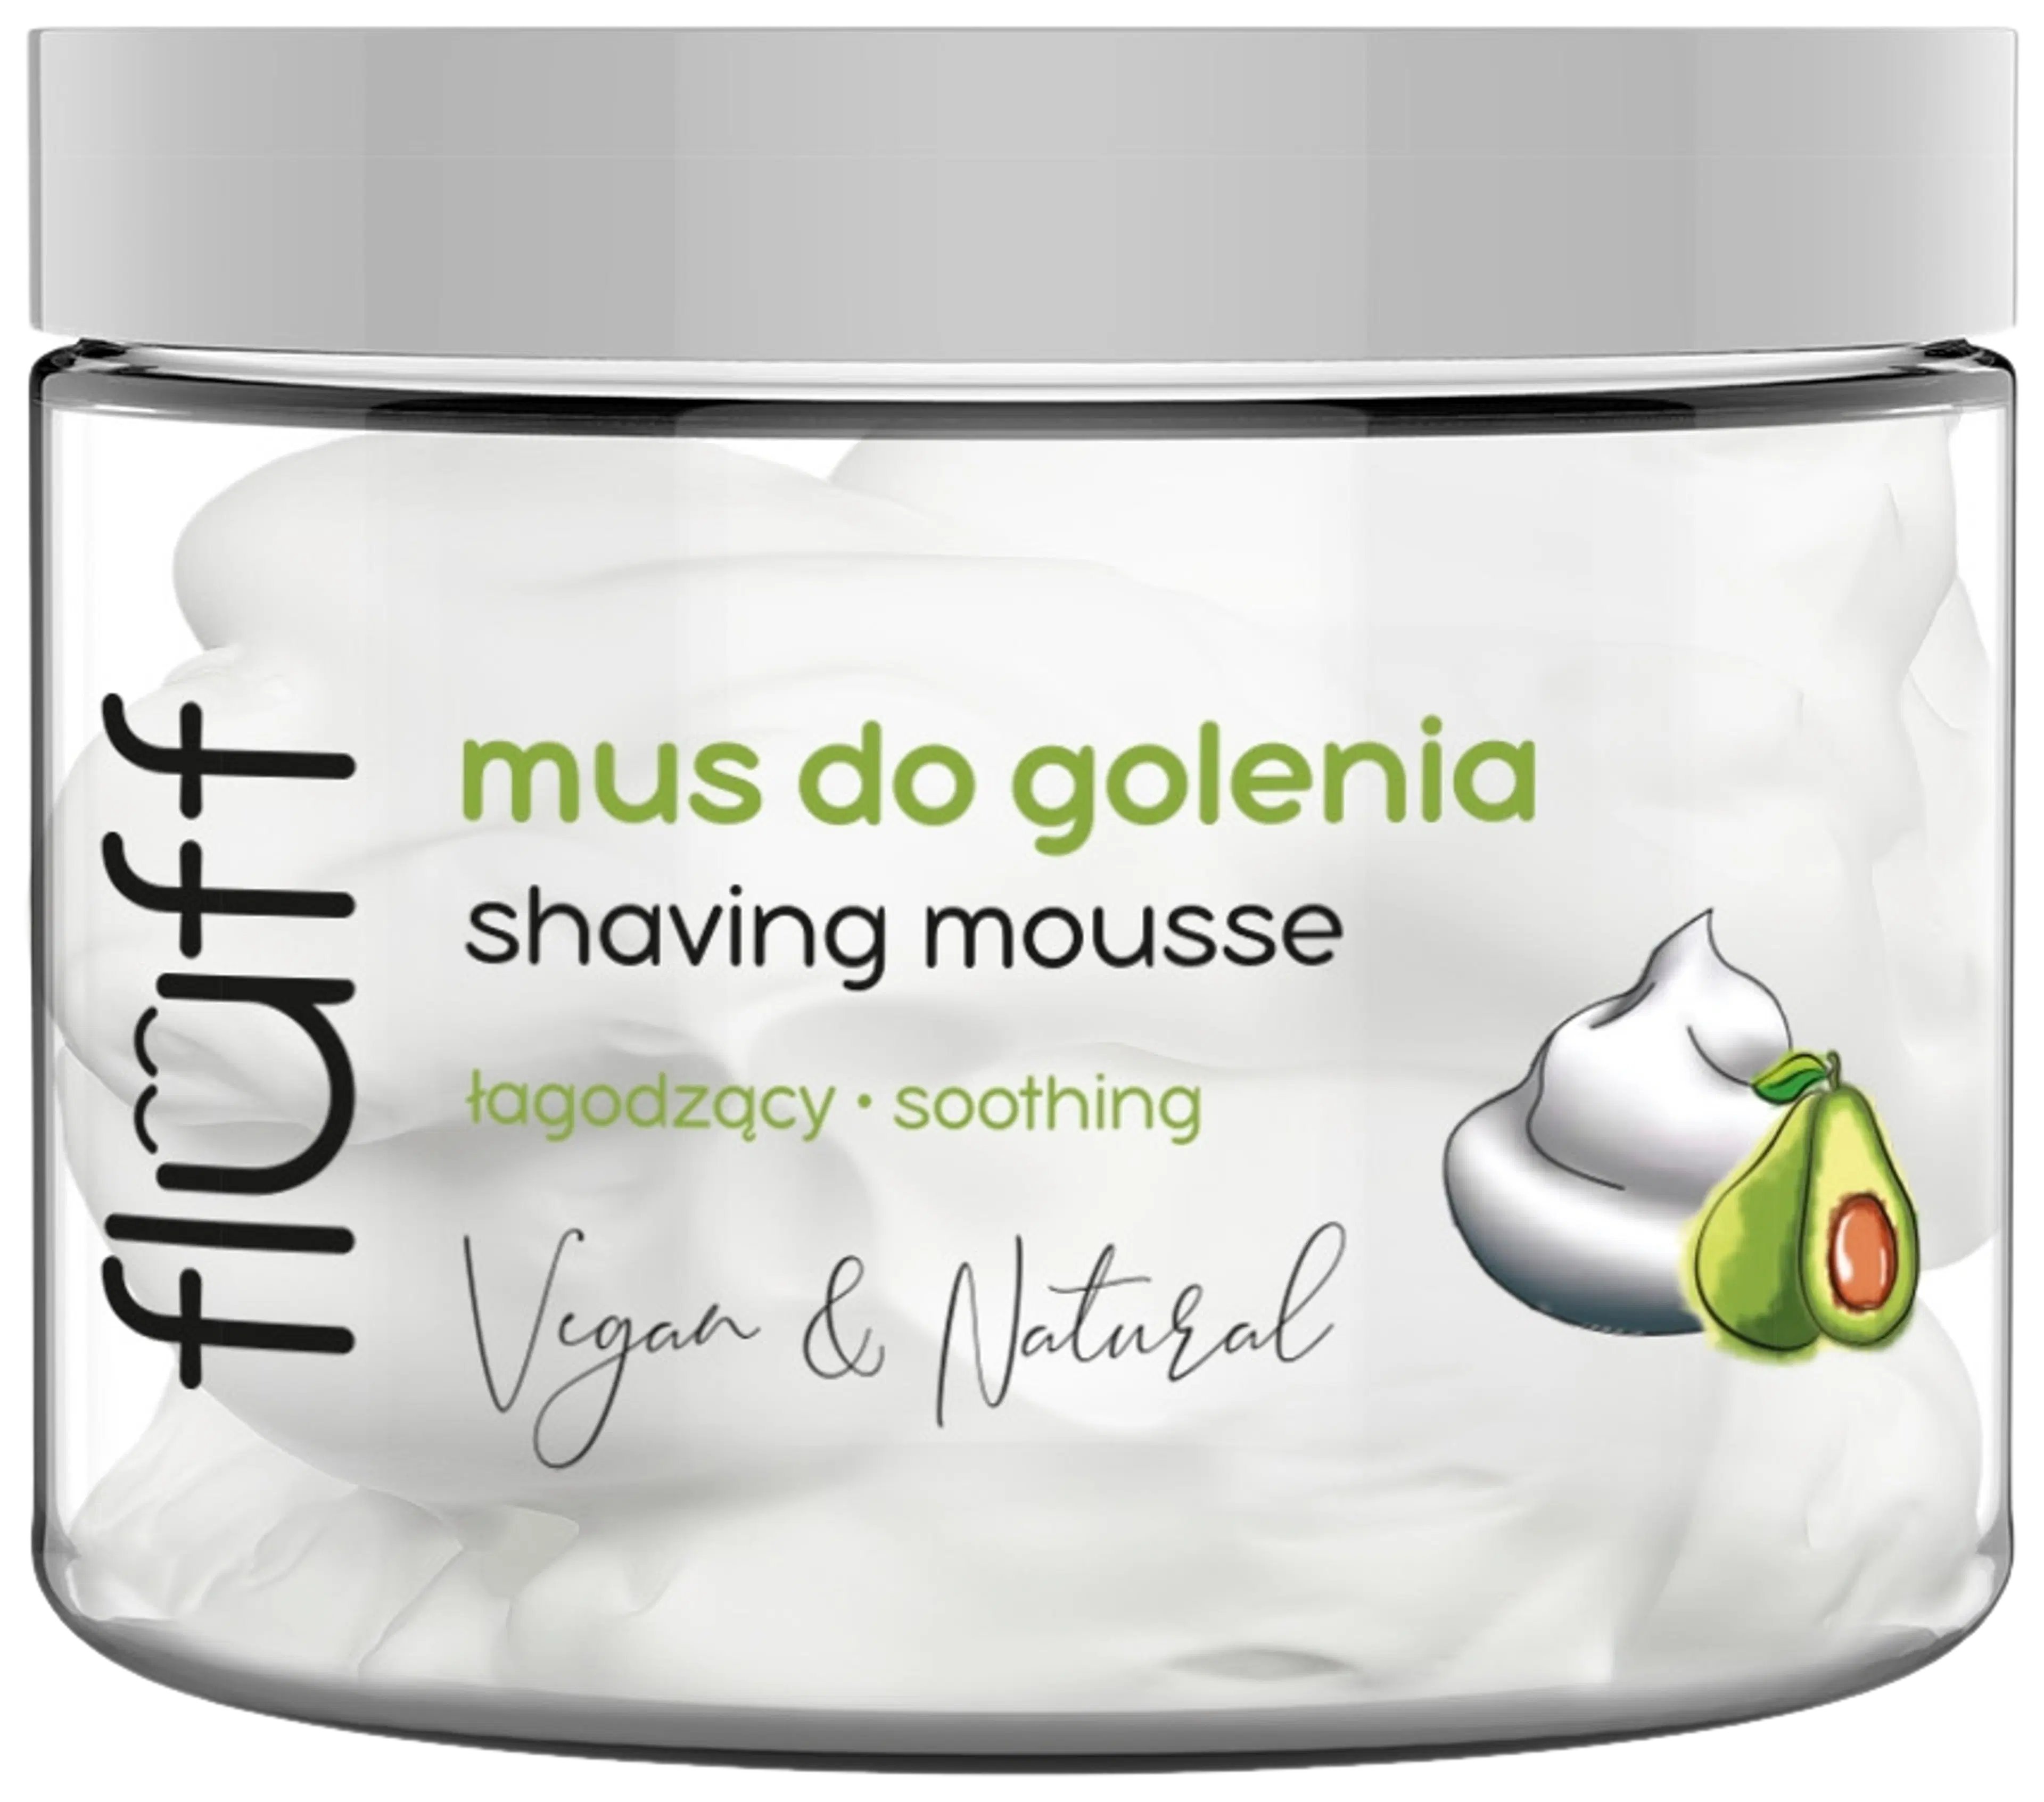 Fluff Shaving mousse with niacynamide and avocado extract -sheivausmousse